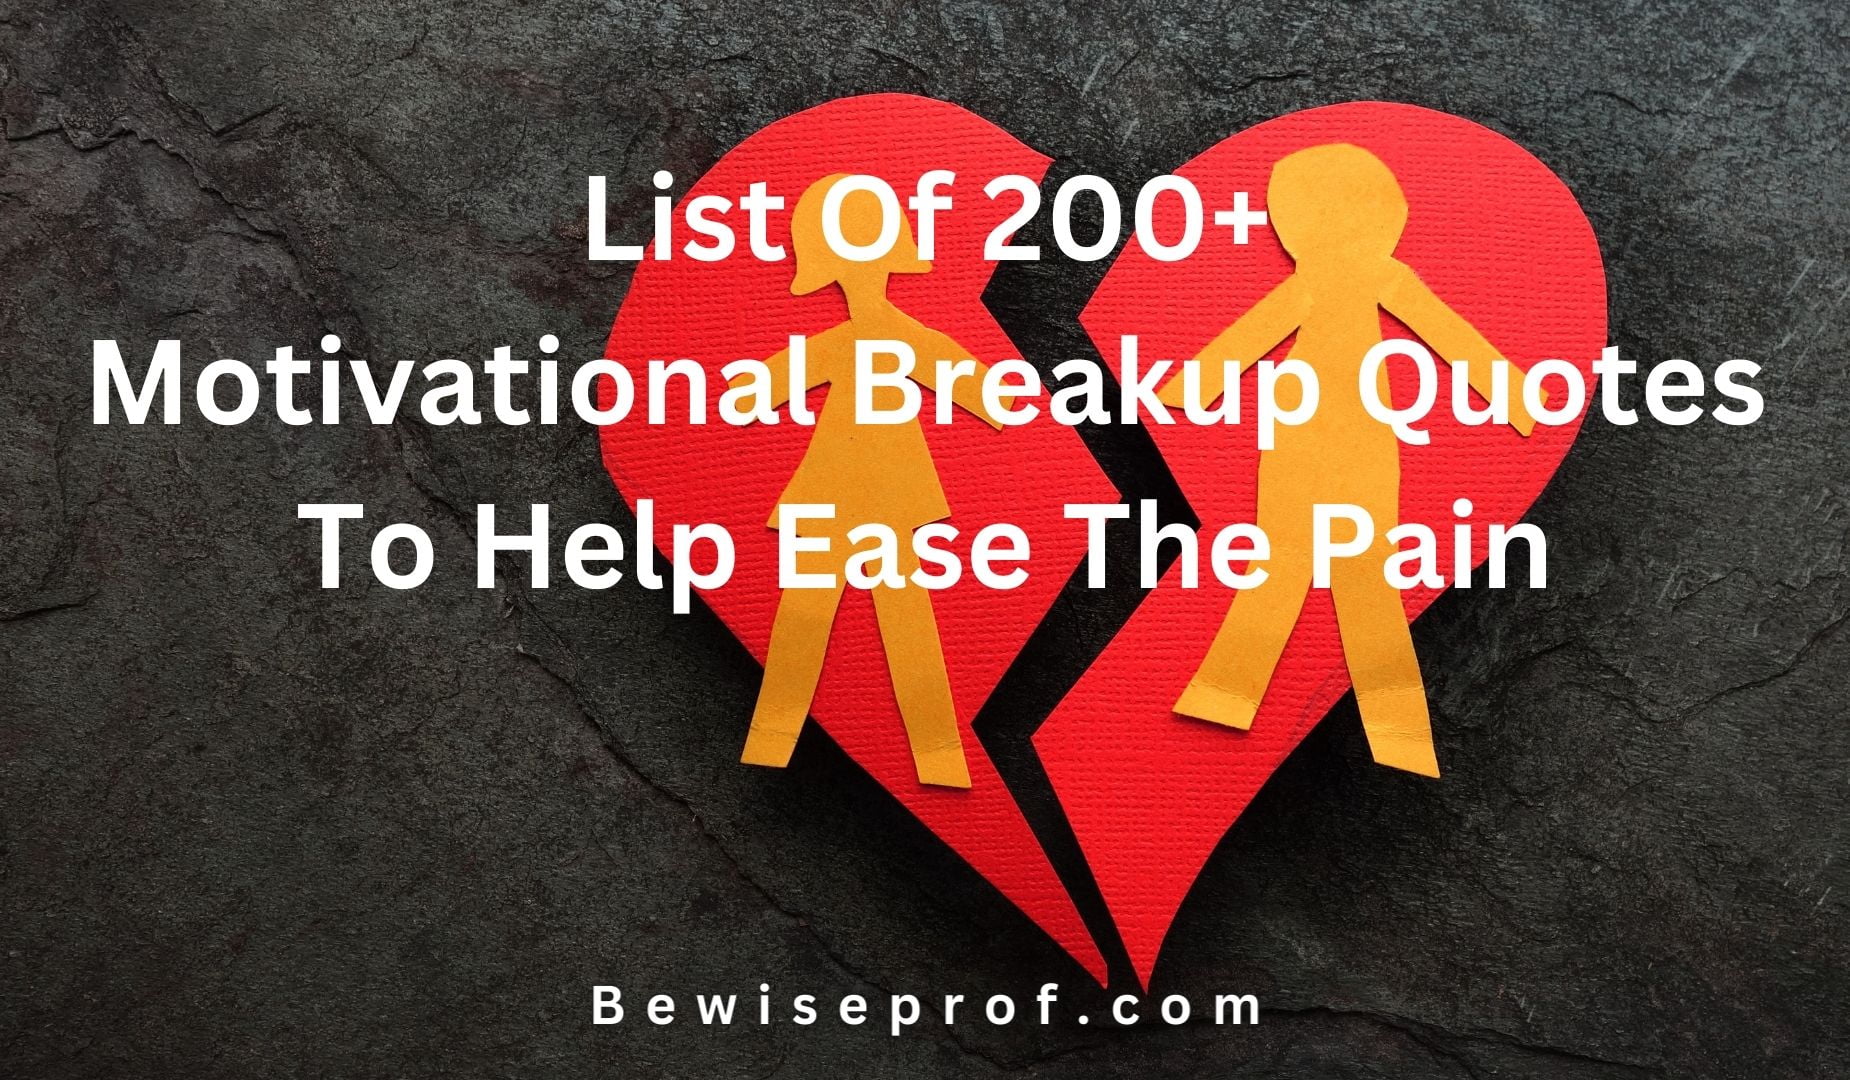 List Of 200+ Motivational Breakup Quotes To Help Ease The Pain